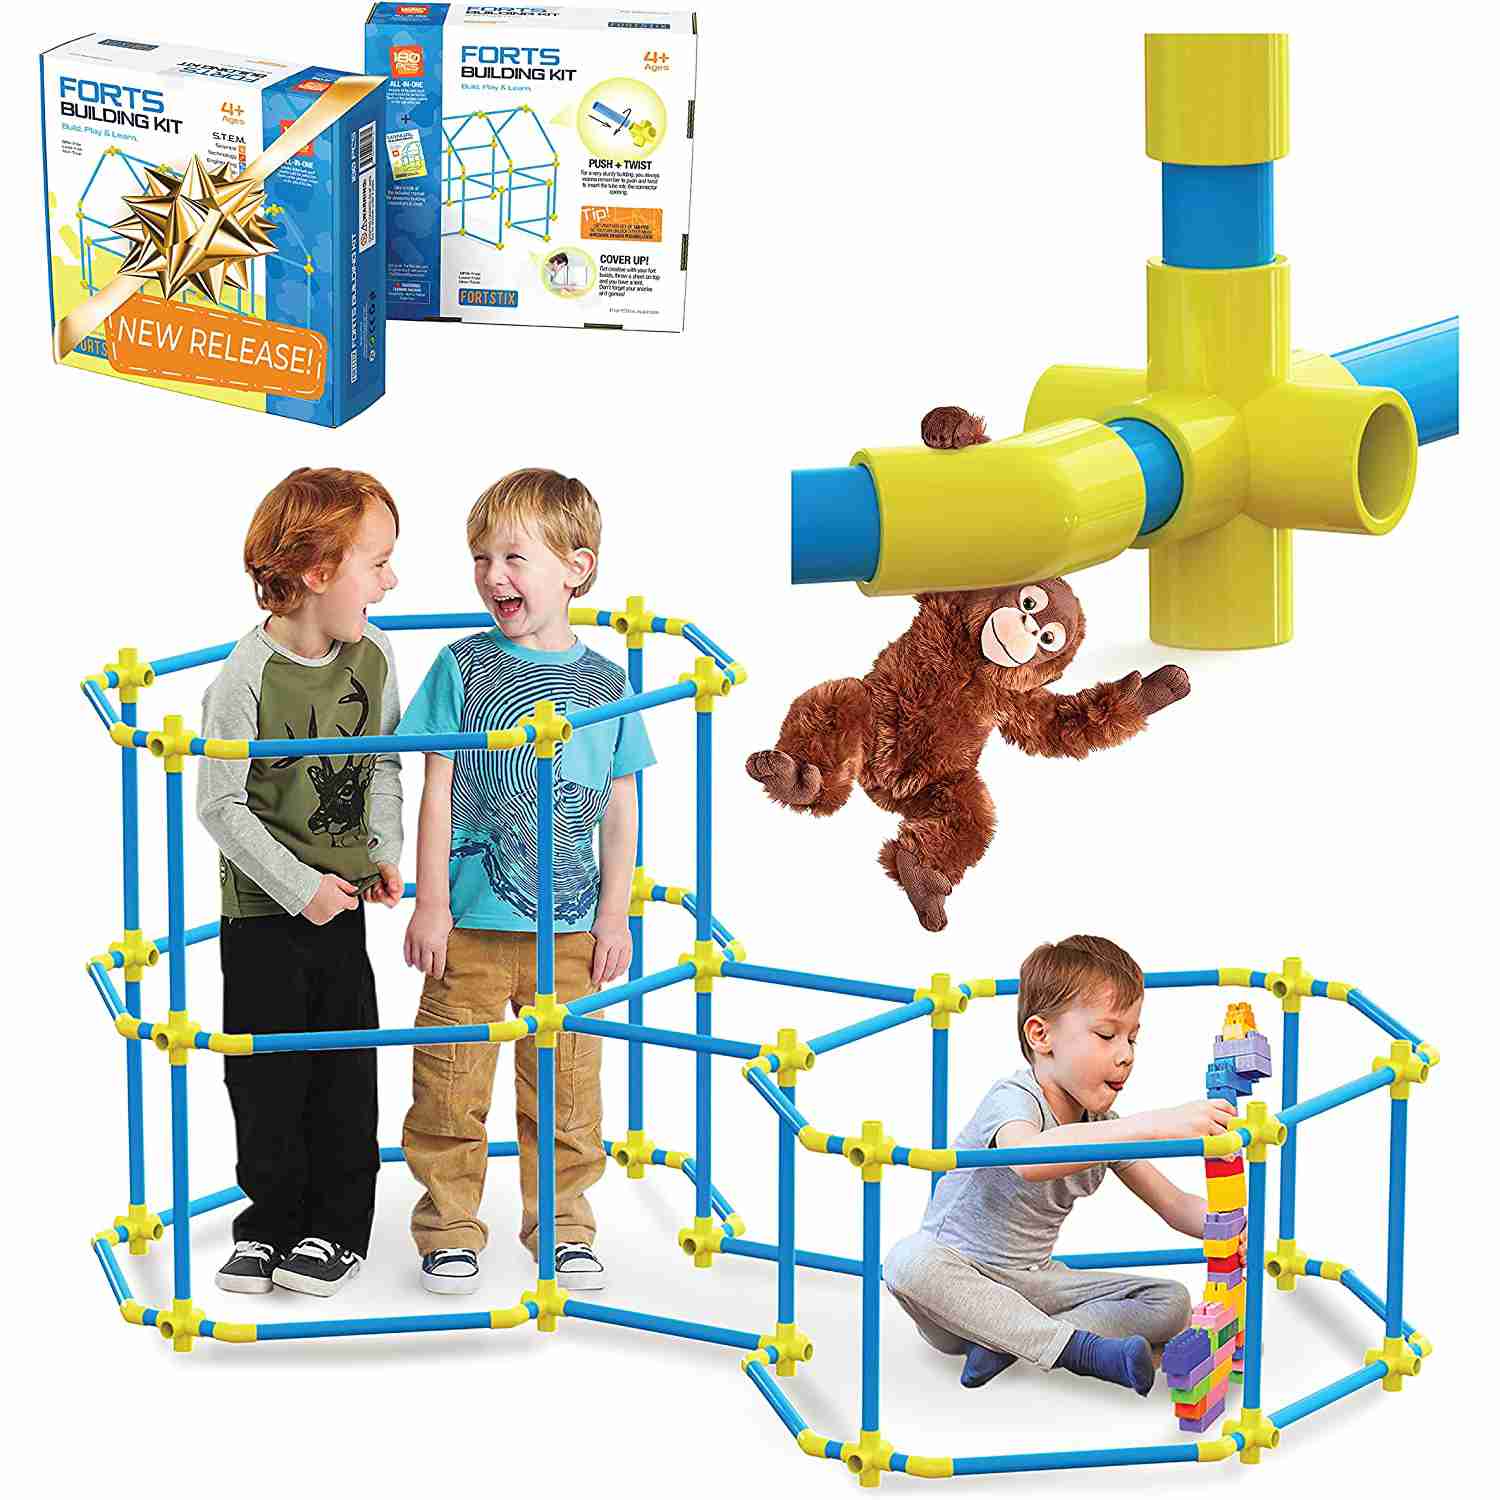 fort-building-toys-for-kids-ages-4-8 with cash back rebate